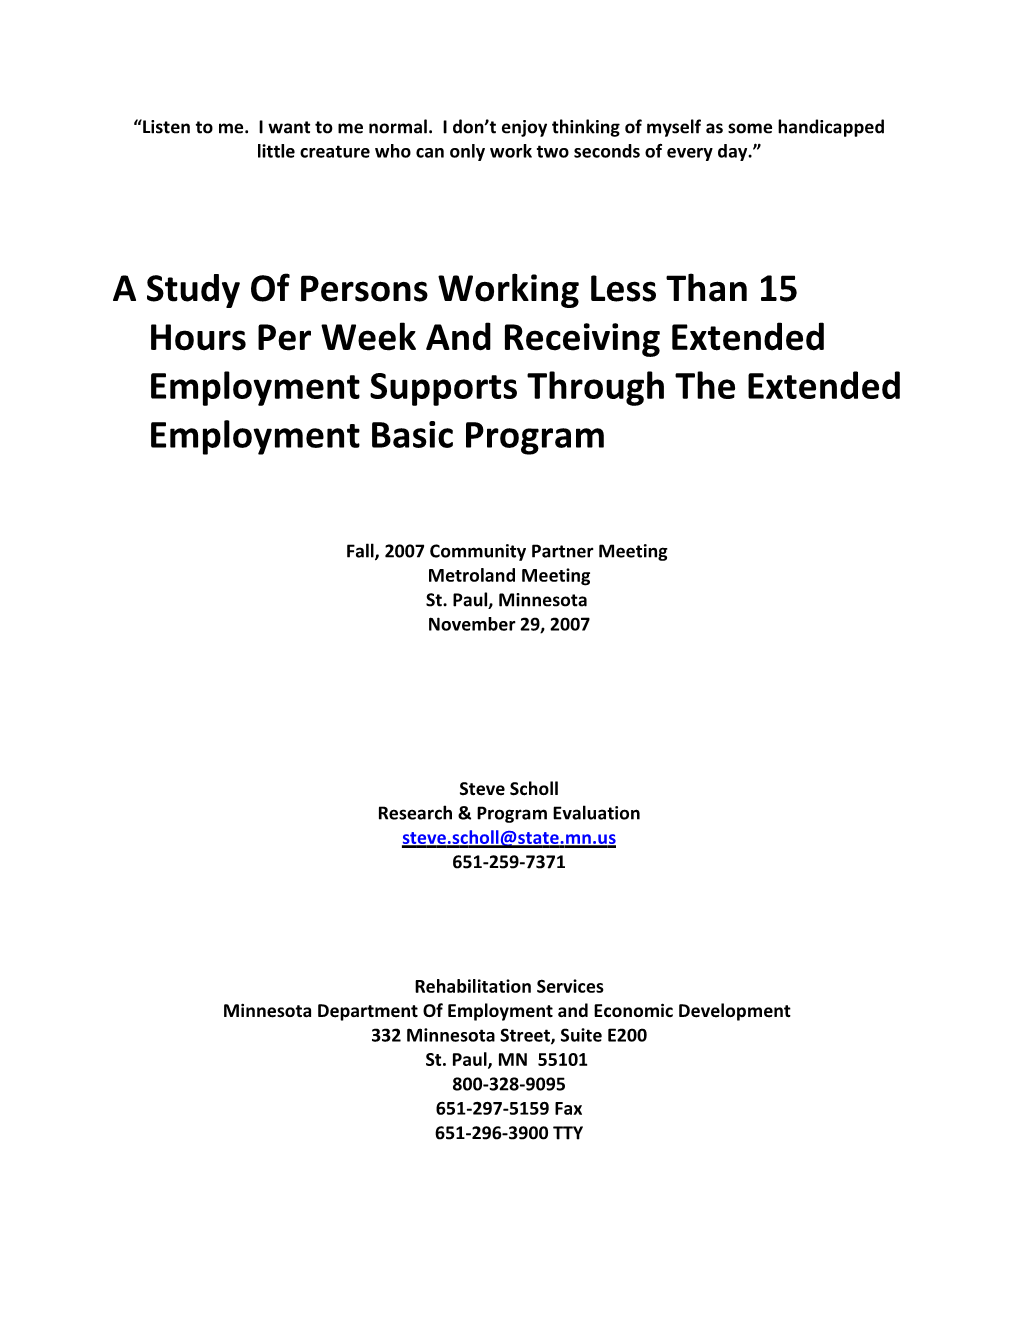 Study of Persons Working Less Than 15 Hours Per Week and Receiving EE Supports Through